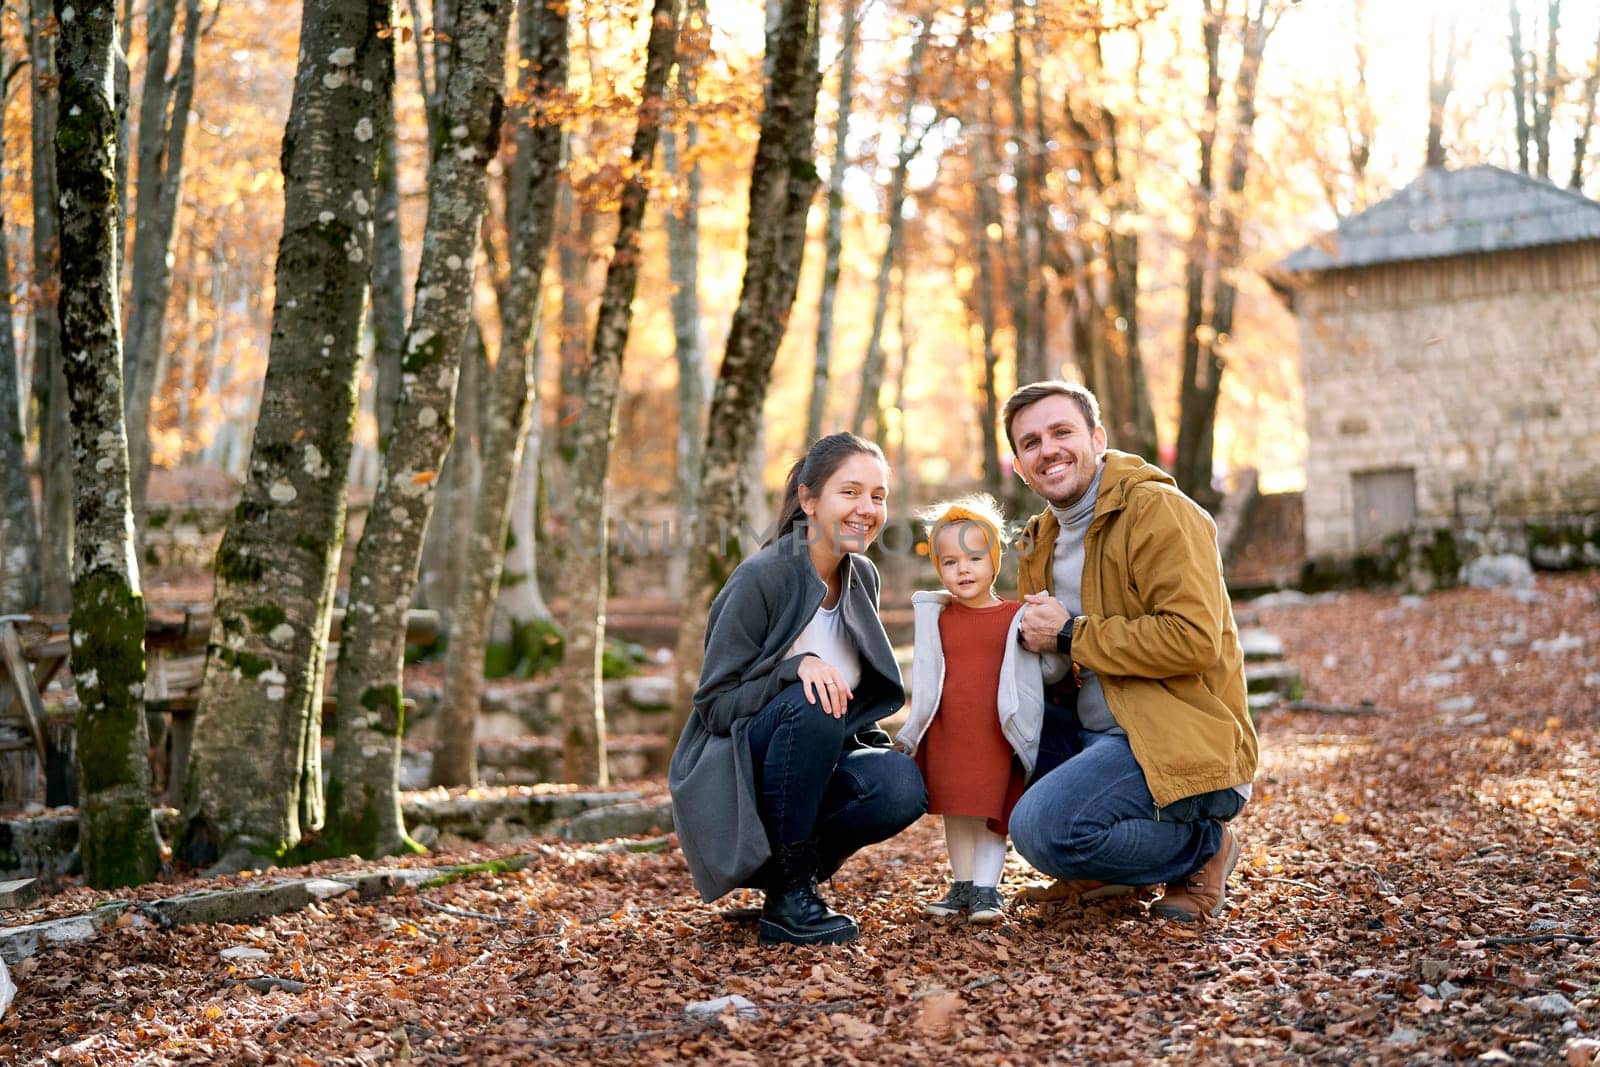 Smiling dad and mom are squatting near a little girl among fallen leaves in the forest by Nadtochiy